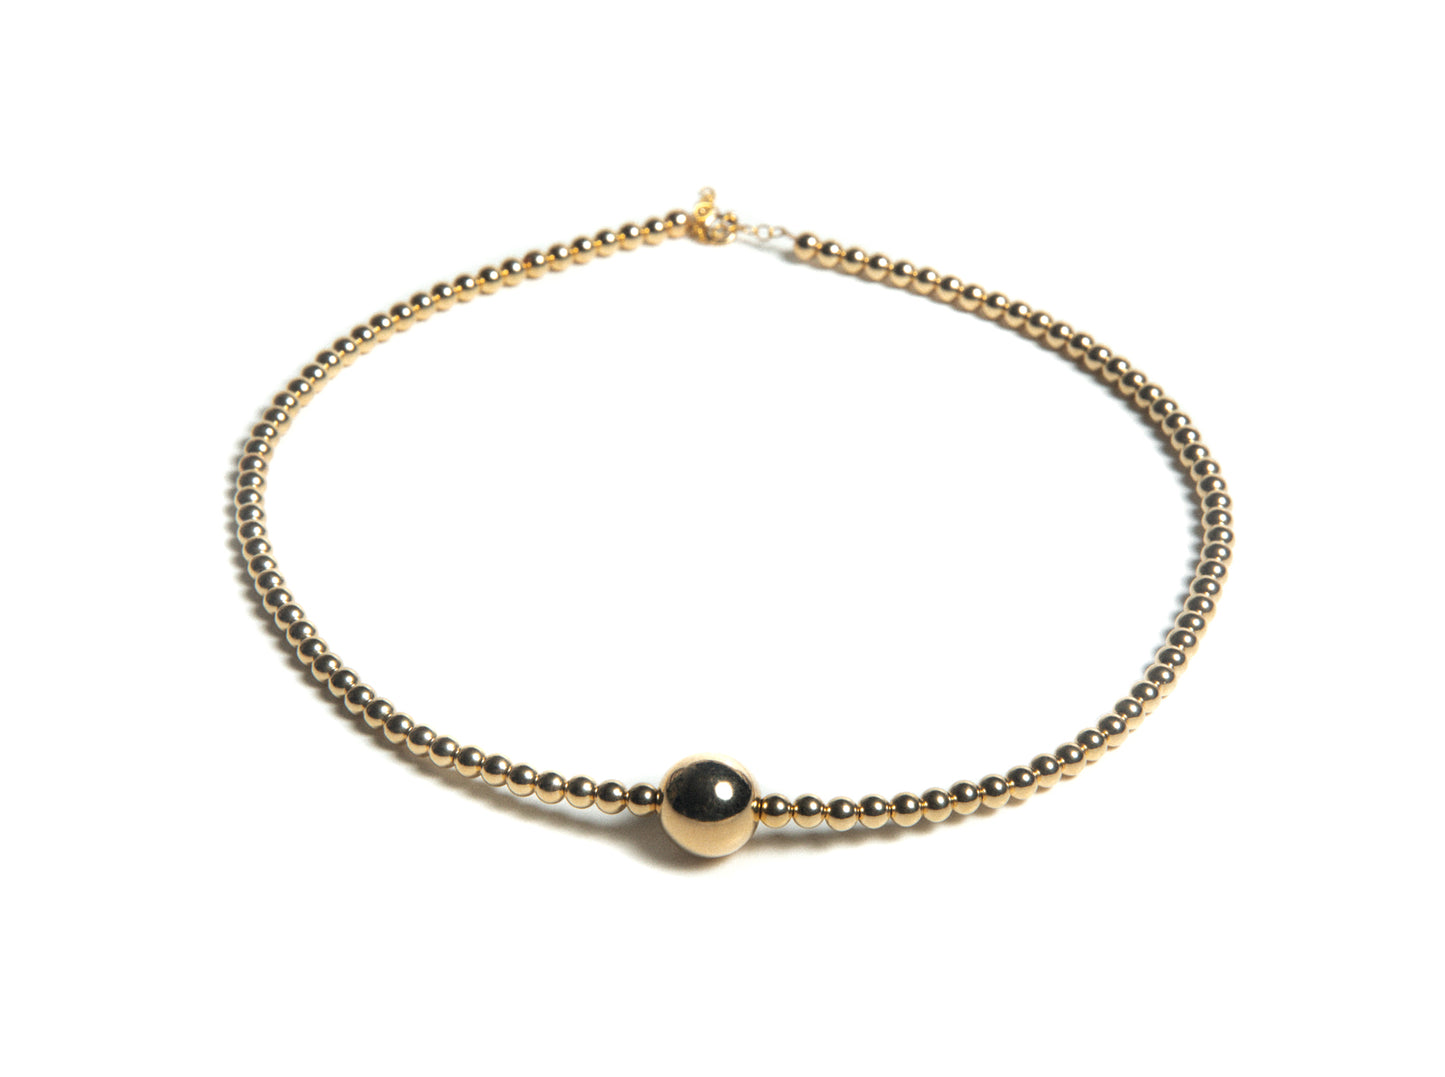 Women's Gold Beaded Choker Necklace with Gold charm on adjustable chain at RM Kandy